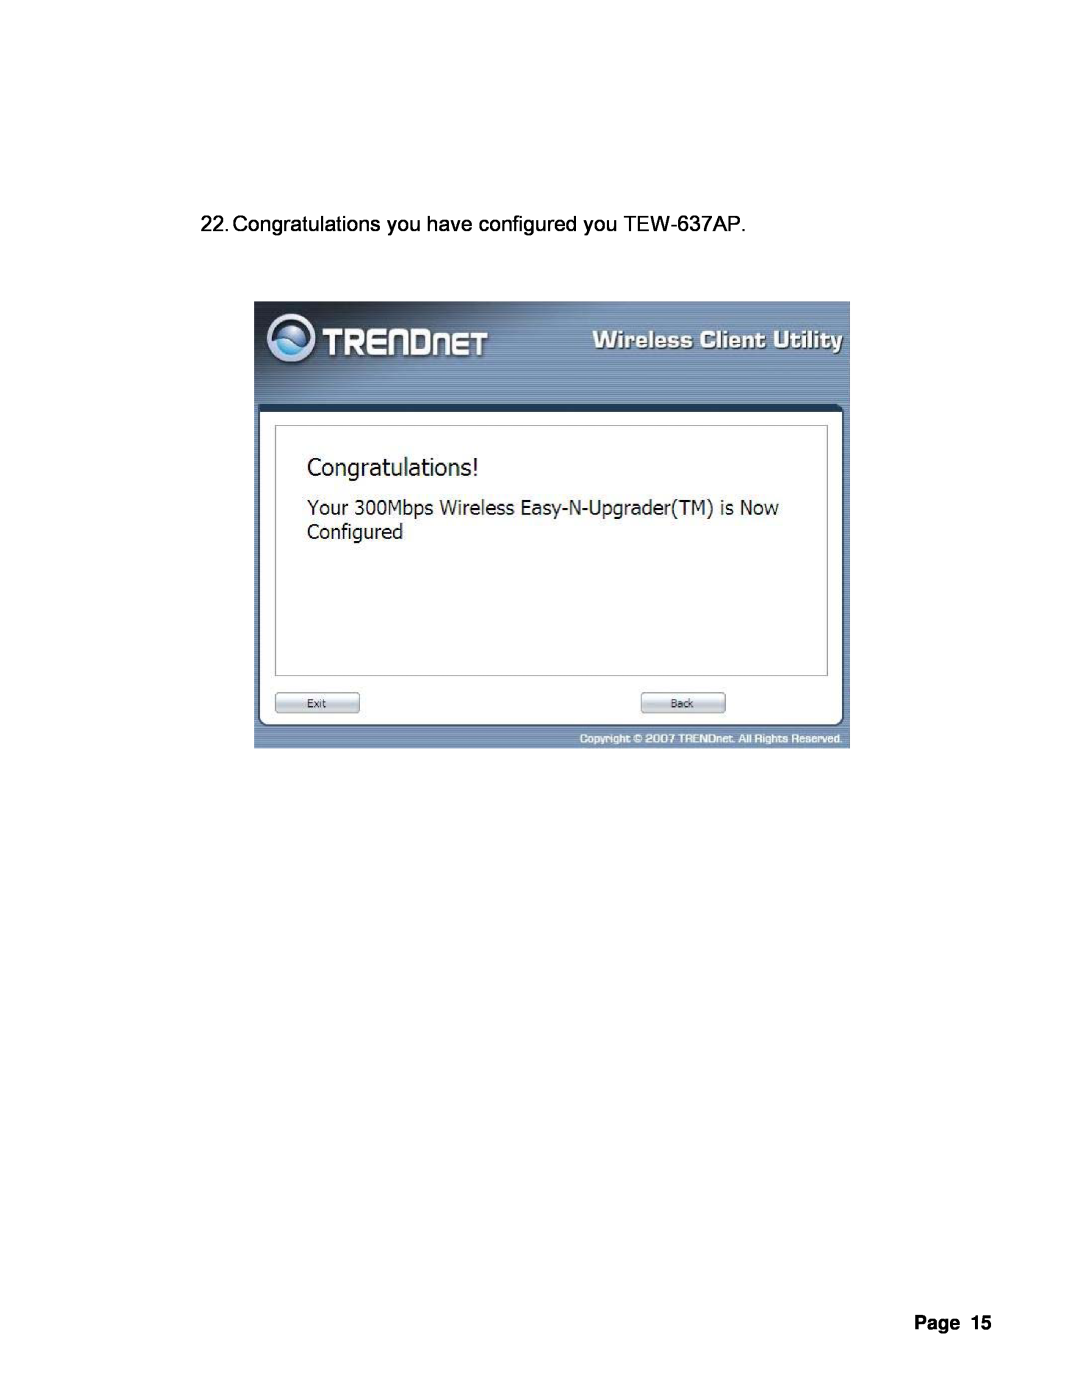 TRENDnet manual Congratulations you have configured you TEW-637AP, Page 